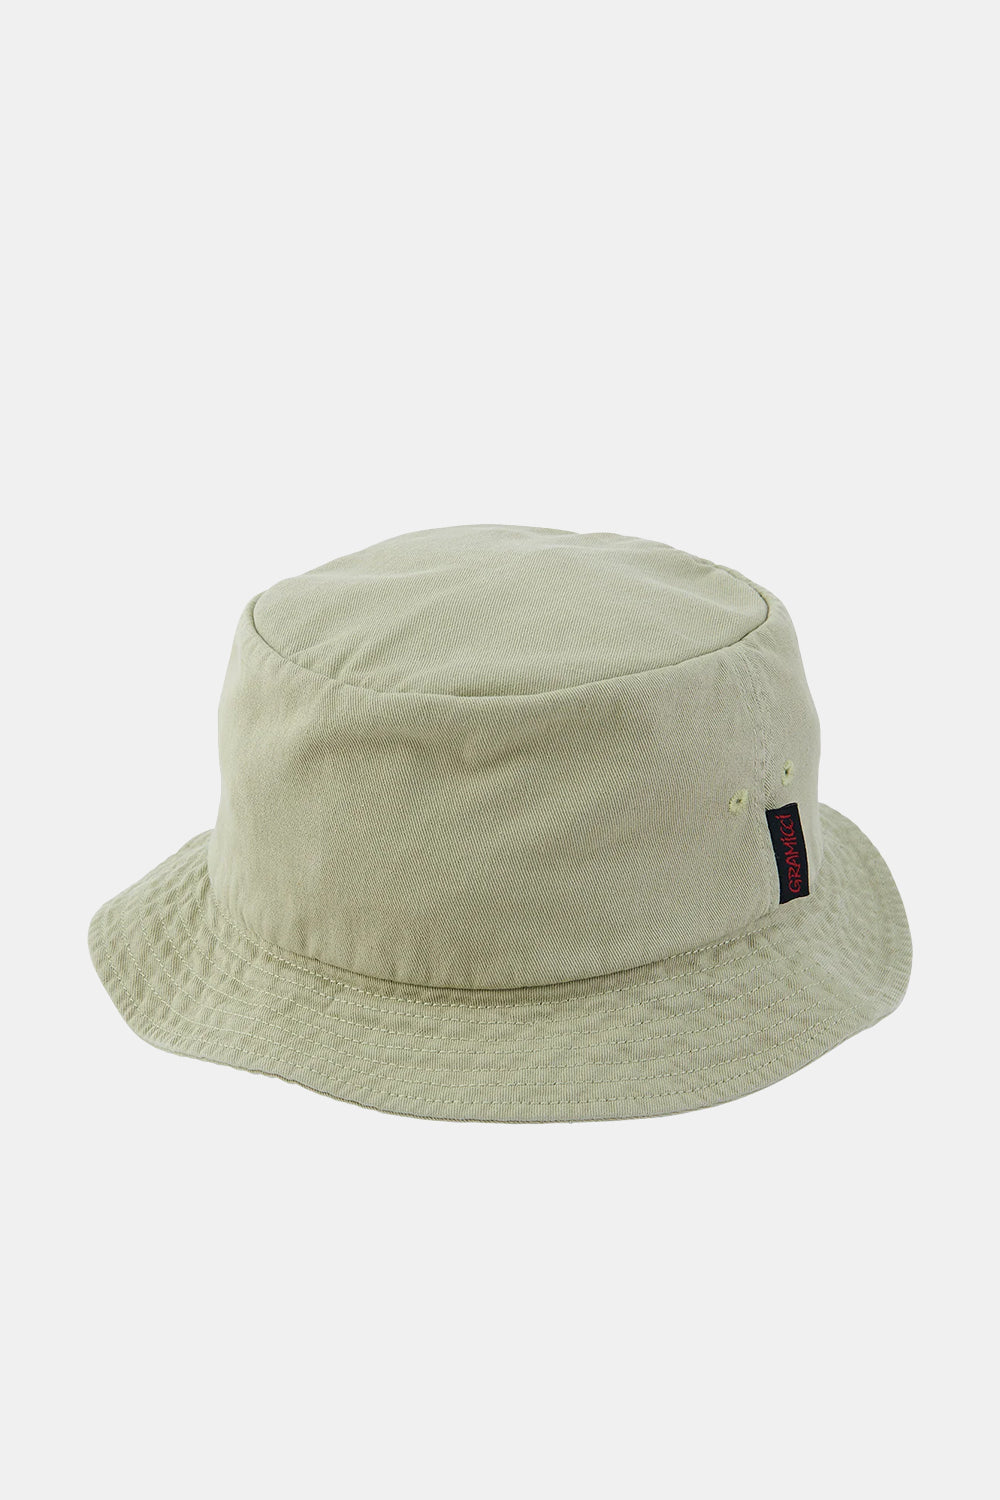 Gramicci Packable Bucket (Faded Olive)